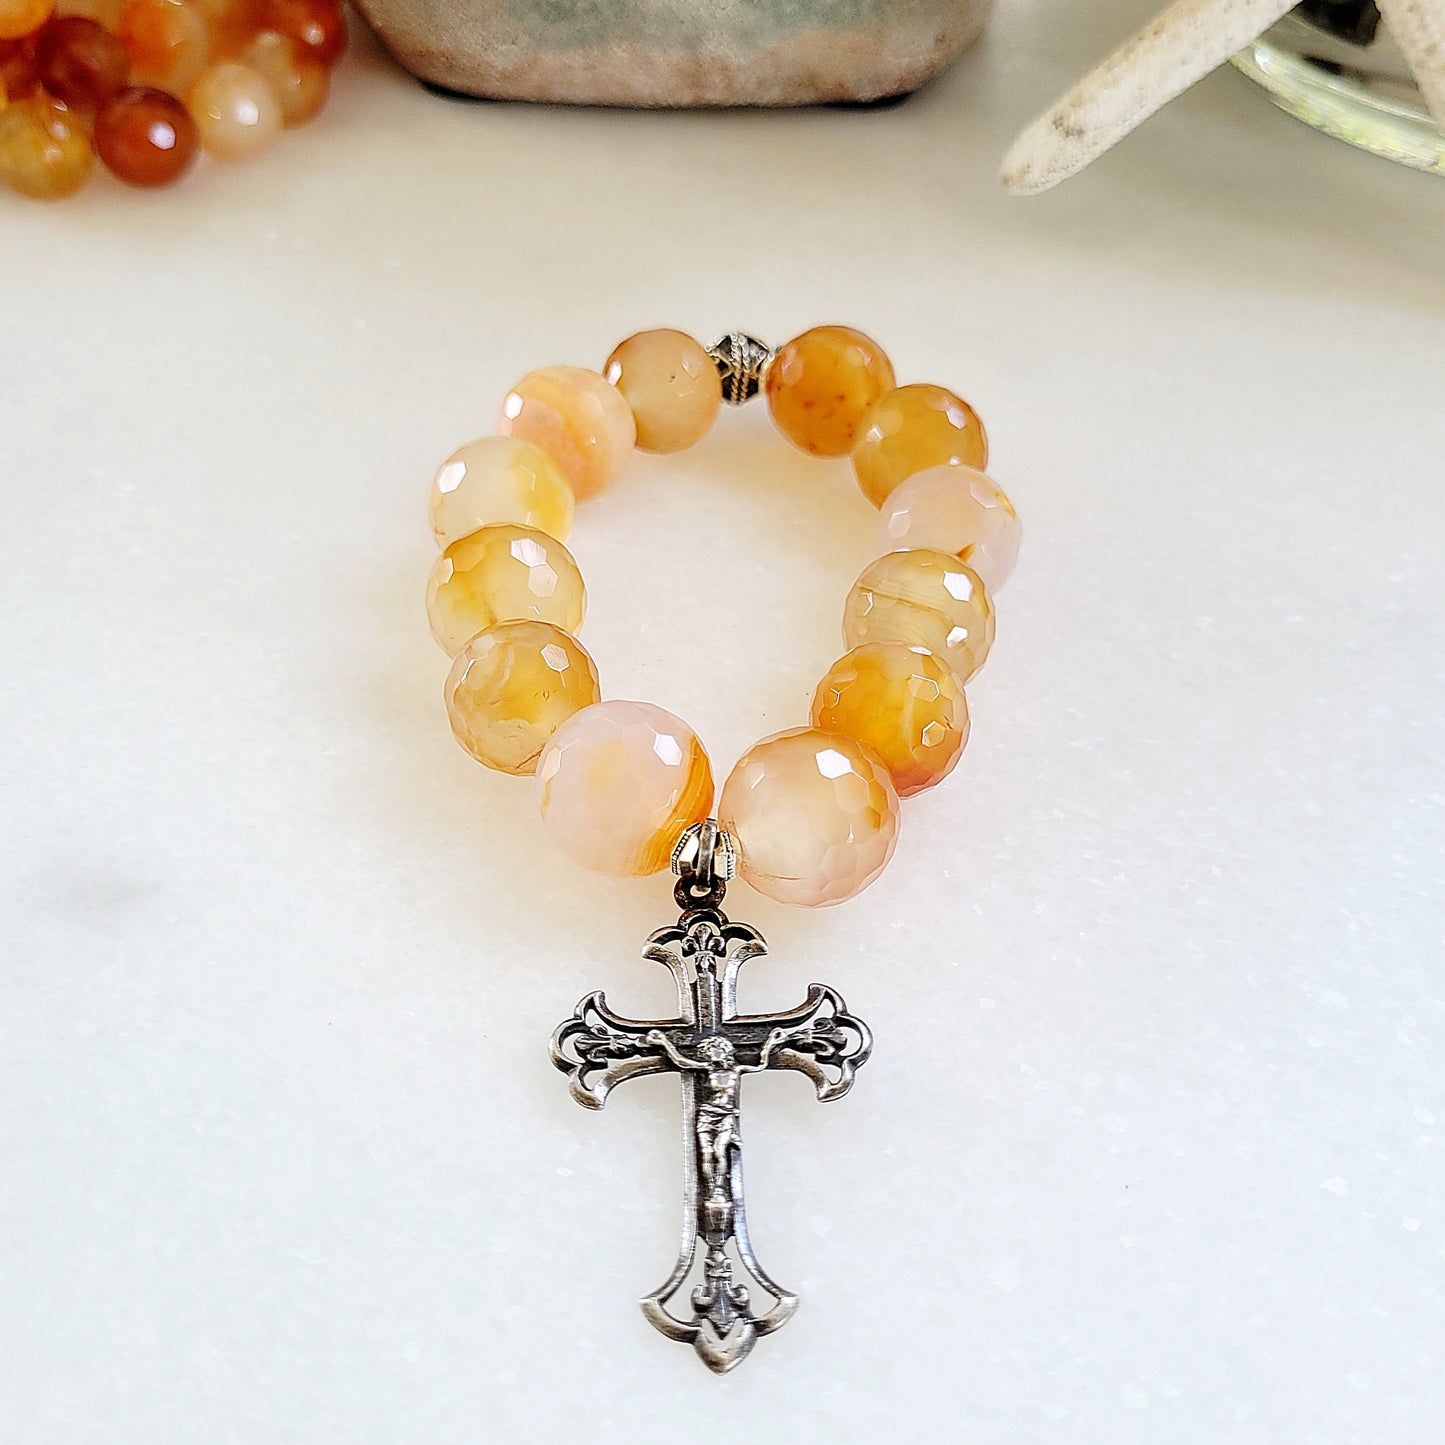 Carnelian Faceted 16mm Beaded Bracelet w/ Antique Silver Art Noveau Cross from France - Afterlife Jewelry Designs